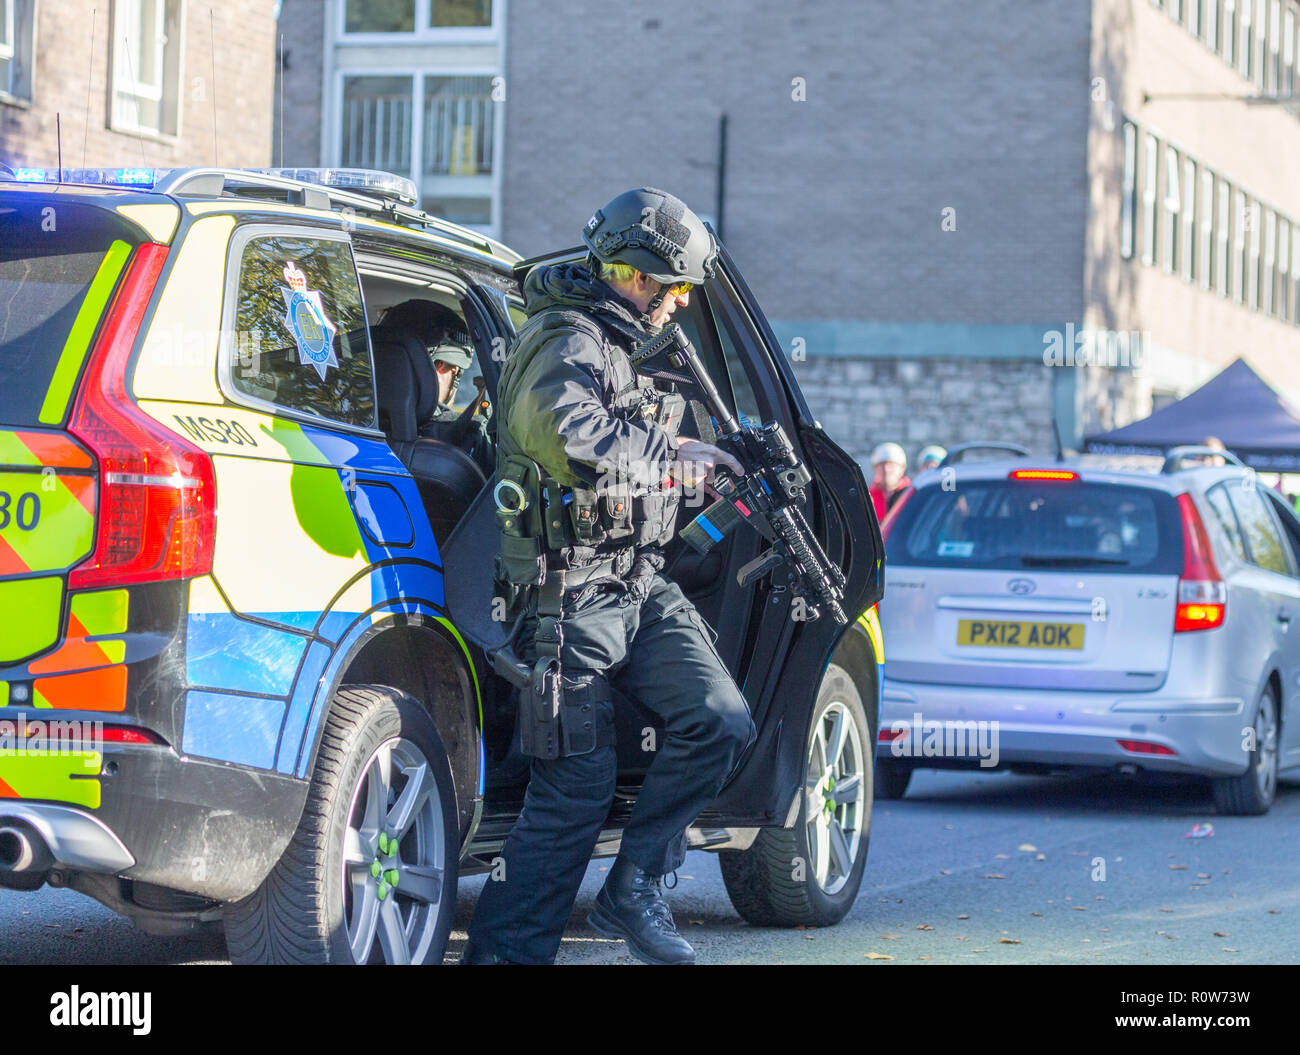 Armed Firearms Police officers demonstrating a vehicle stop and arrest of a suspected armed criminal/terrorist at a police open day Stock Photo